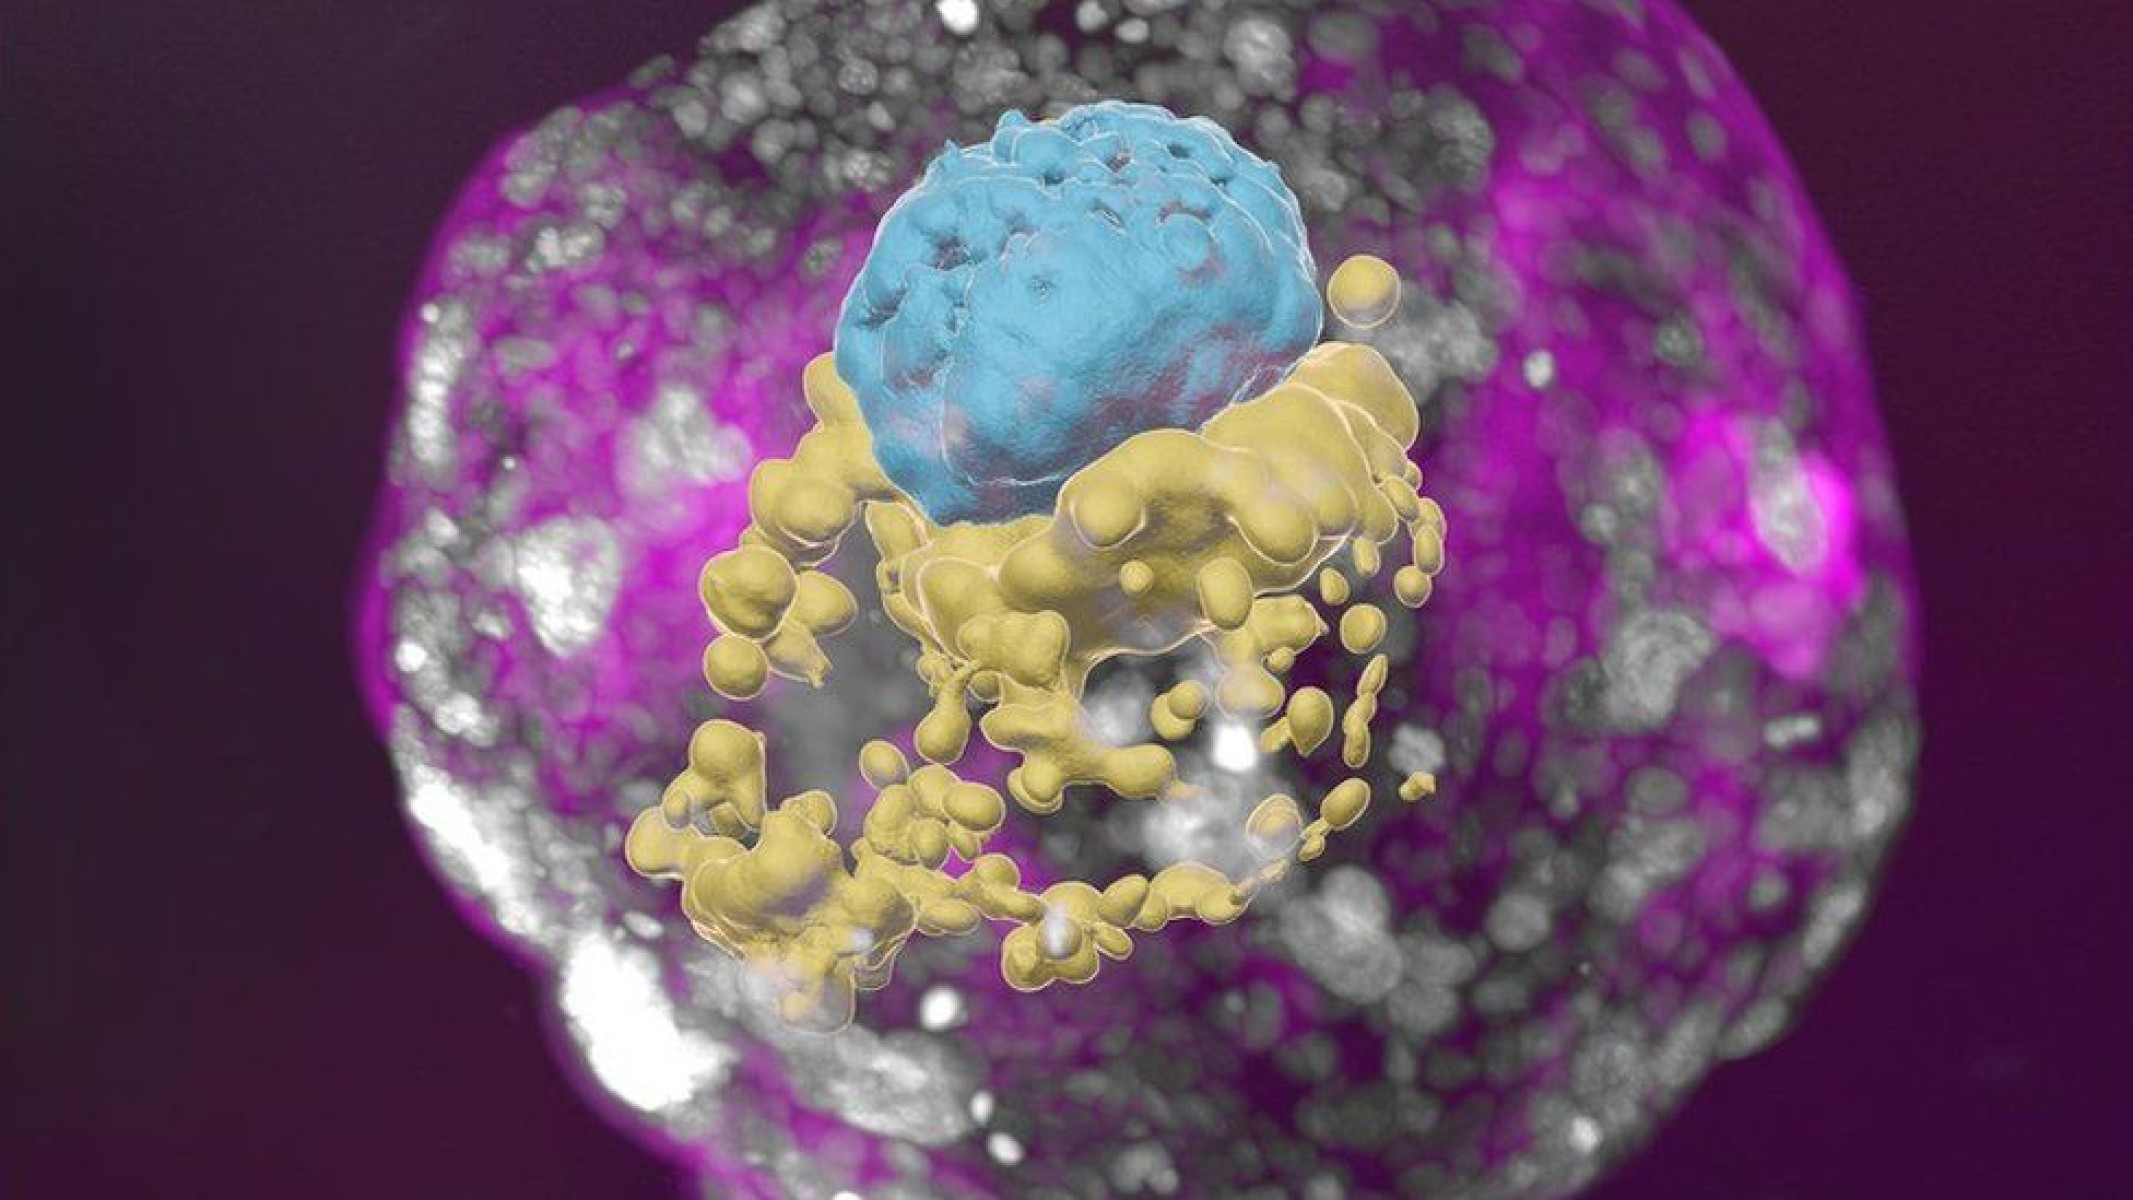 Weizmann Institute of Science. A stem-cell derived human embryo model showing blue cells (embryo), yellow cells (yolk sac) and pink cells (placenta).